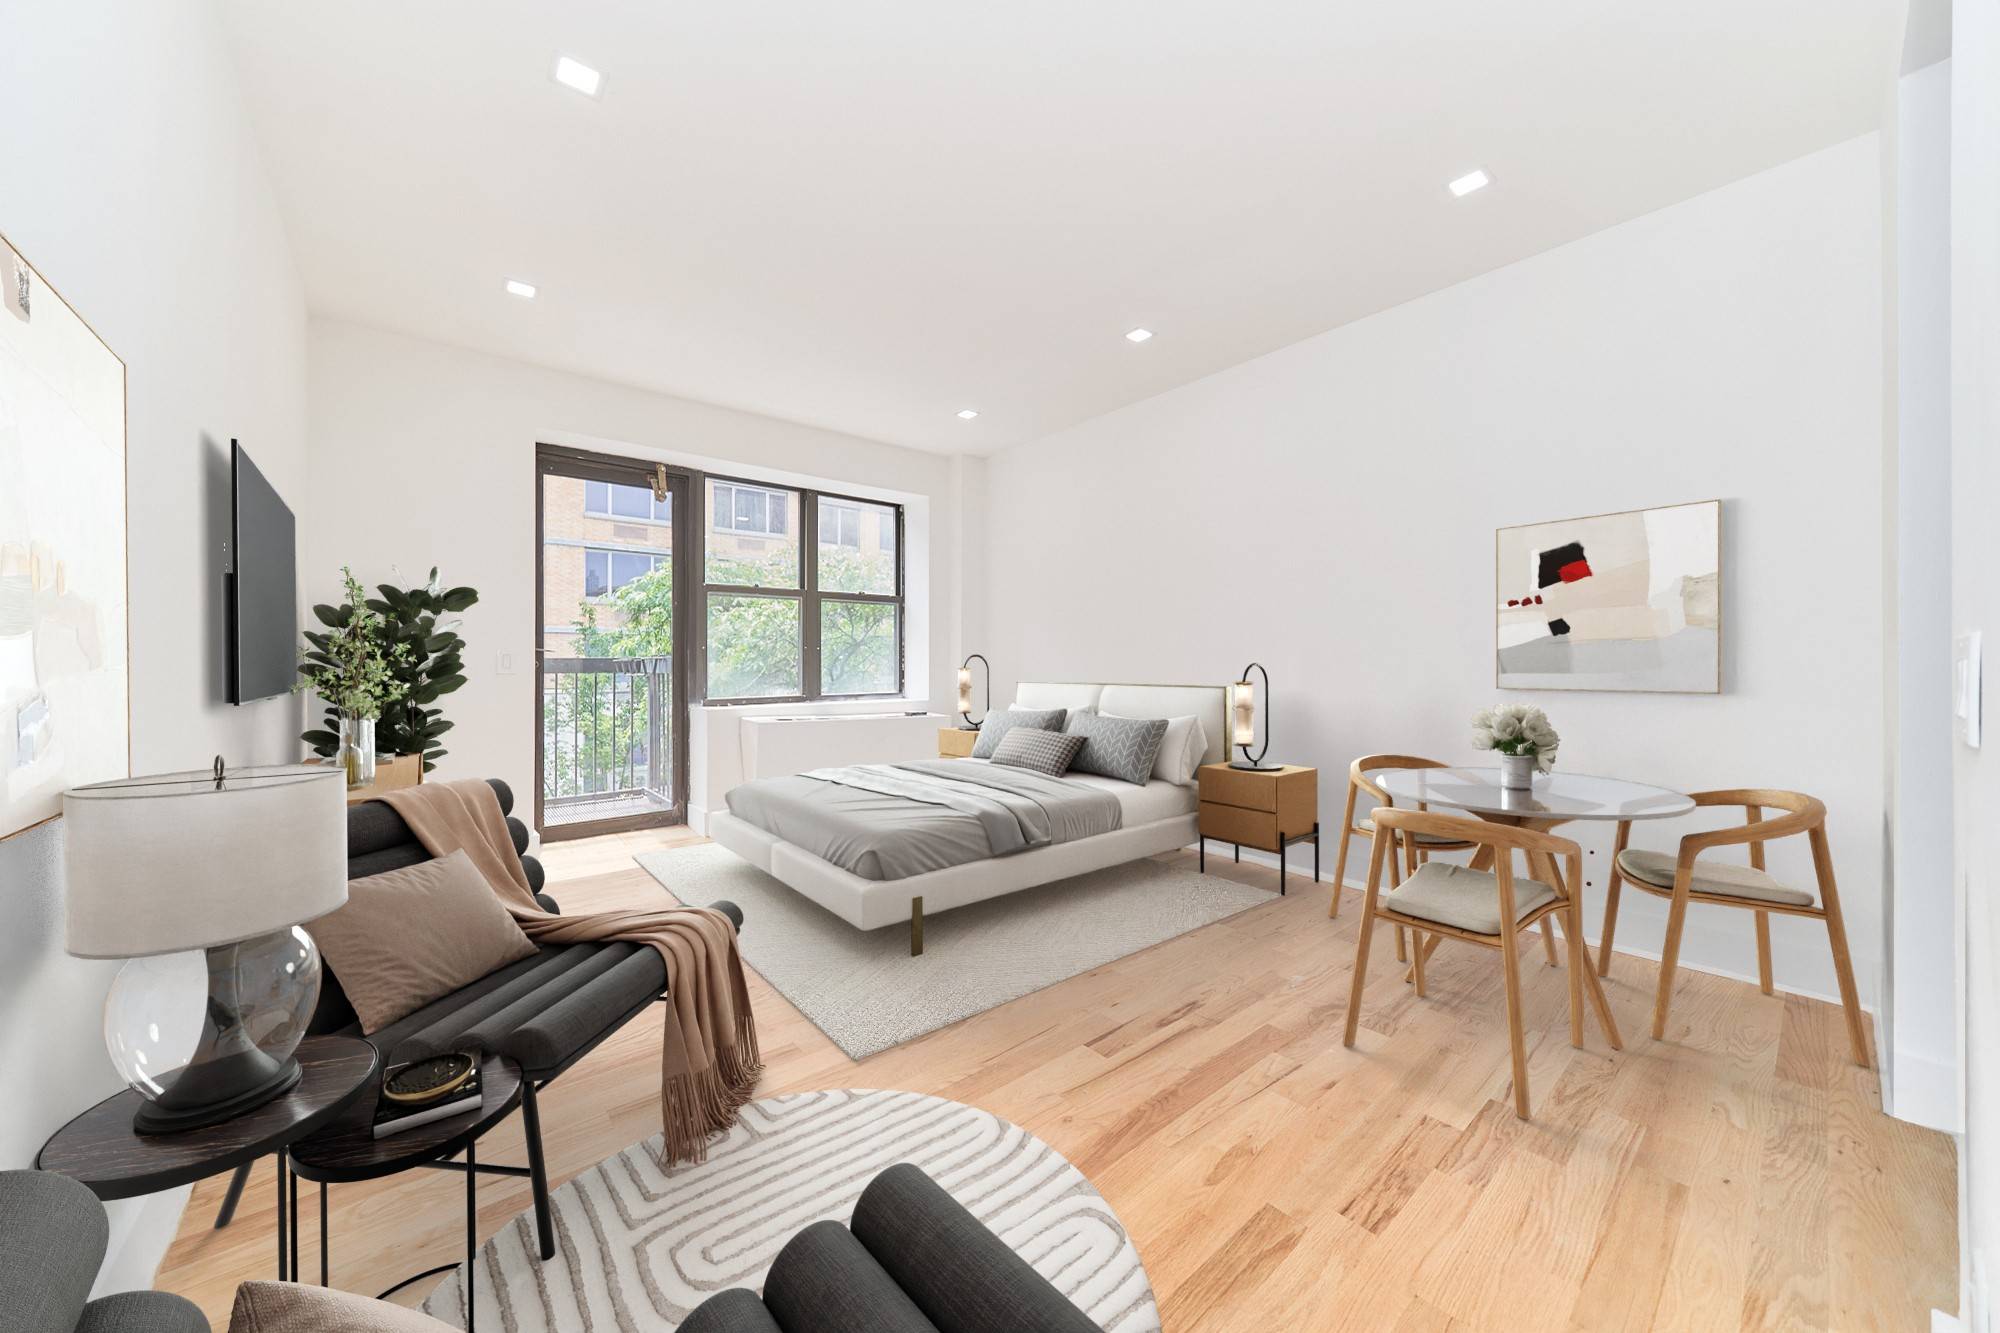 APARTMENT FEATURES BalconyDishwasherStainless Steel AppliancesNatural SunlightHardwood FloorsSoak in TubNeighborhood Building ElevatorLaundry in BuildingResponsive Management TRANSPORTATION Steps away from the Port Authority Bus Terminal and the 42nd Stre